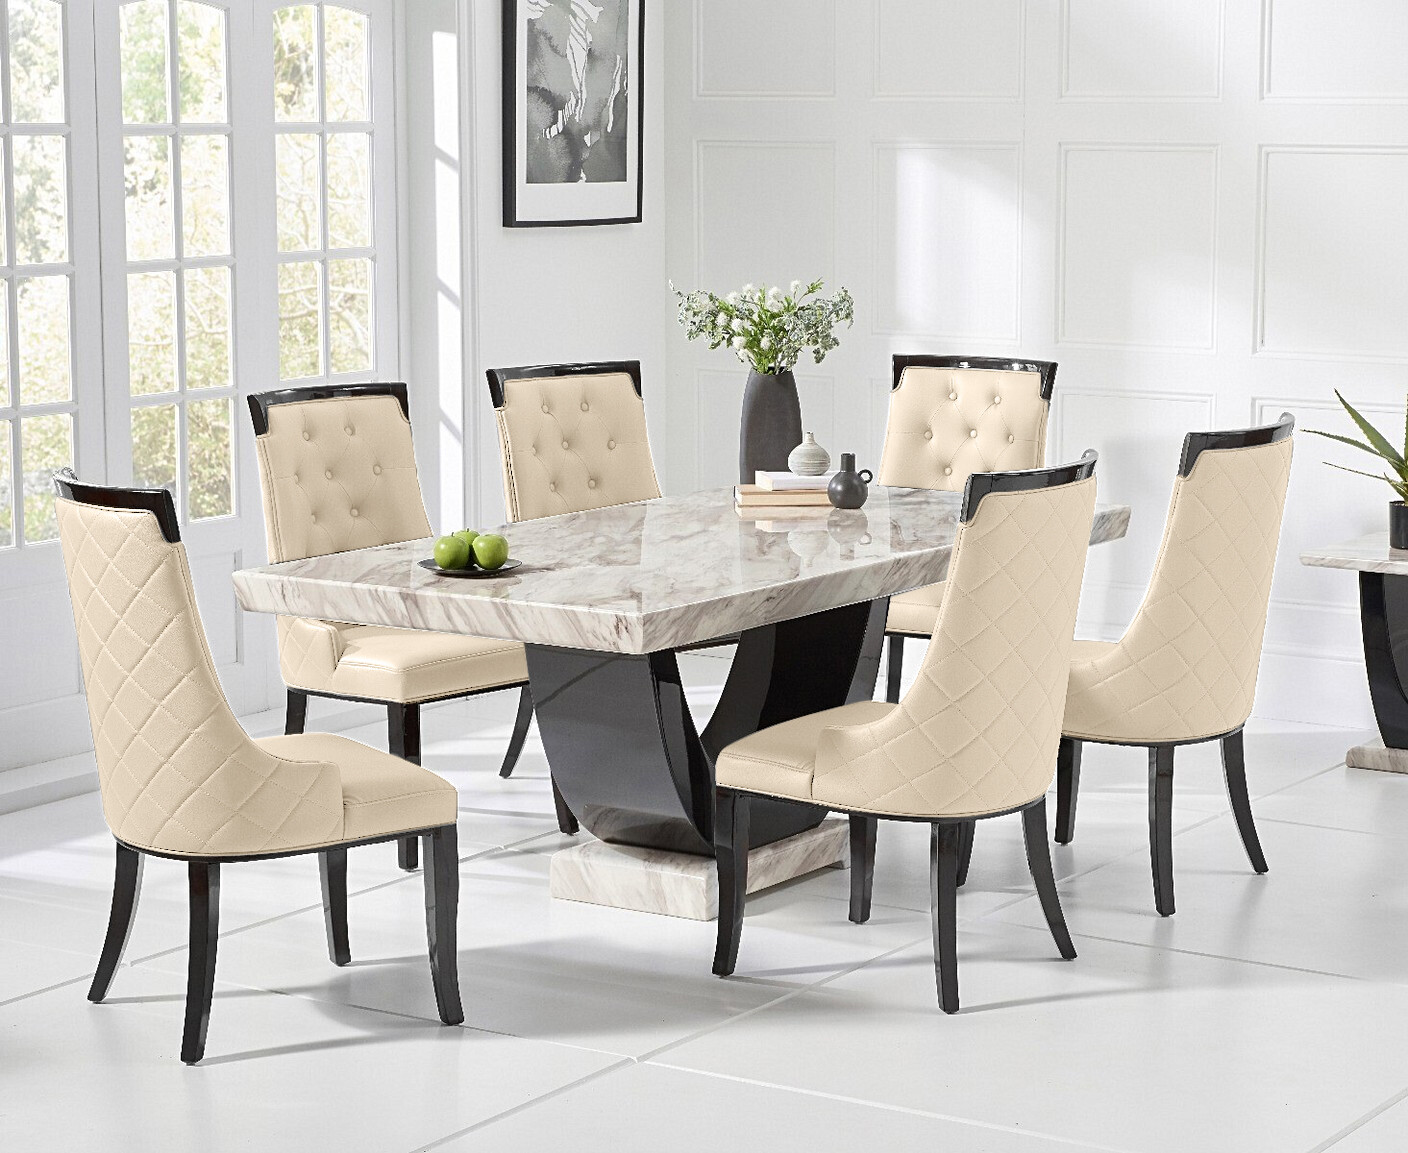 Photo 2 of Raphael 170cm cream and black pedestal marble dining table with 6 grey francesca chairs